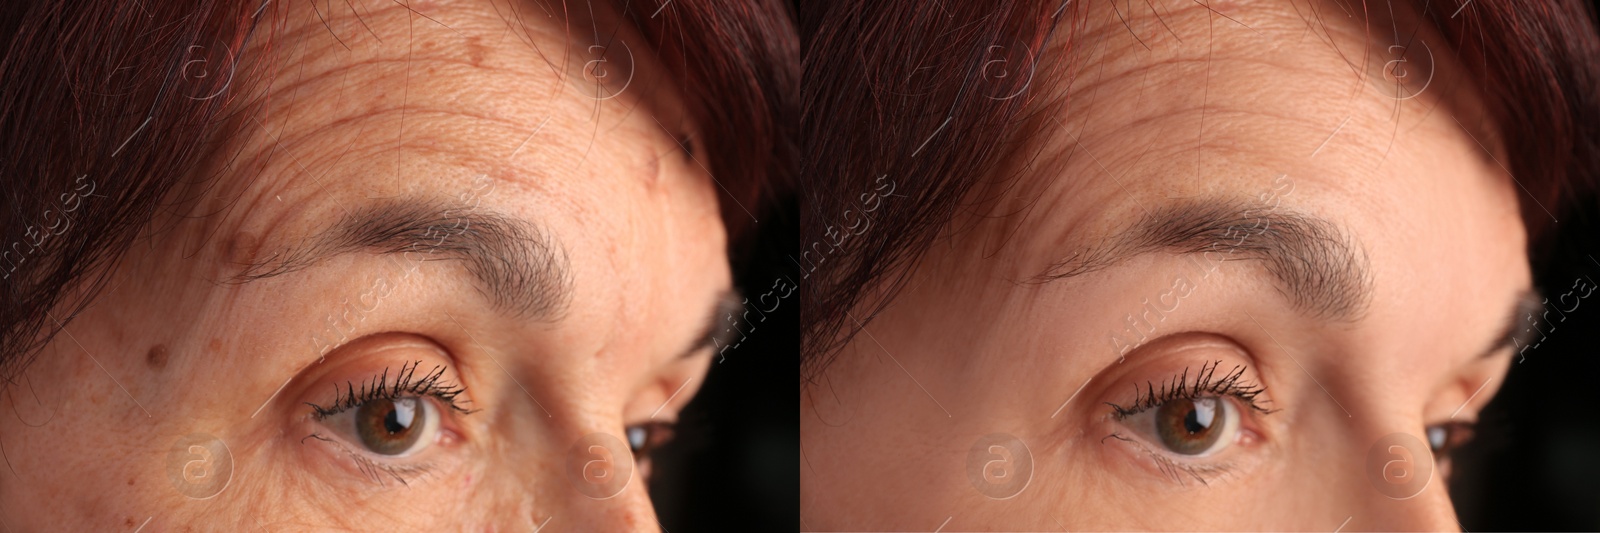 Image of Woman looking better due to cosmetic procedures. Collage with photos before and after rejuvenation, closeup